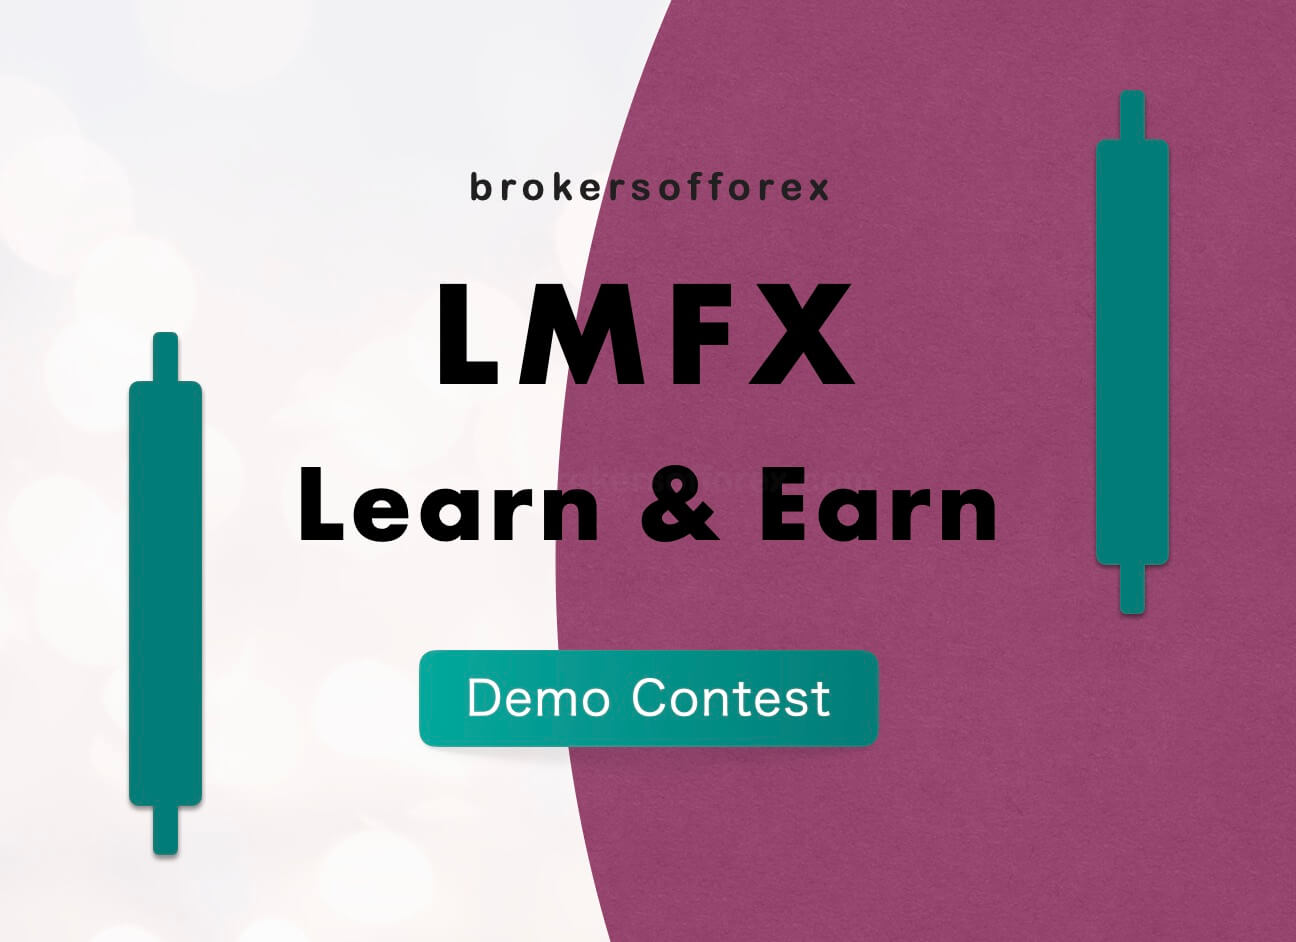 LMFX Learn & Earn Forex Contest